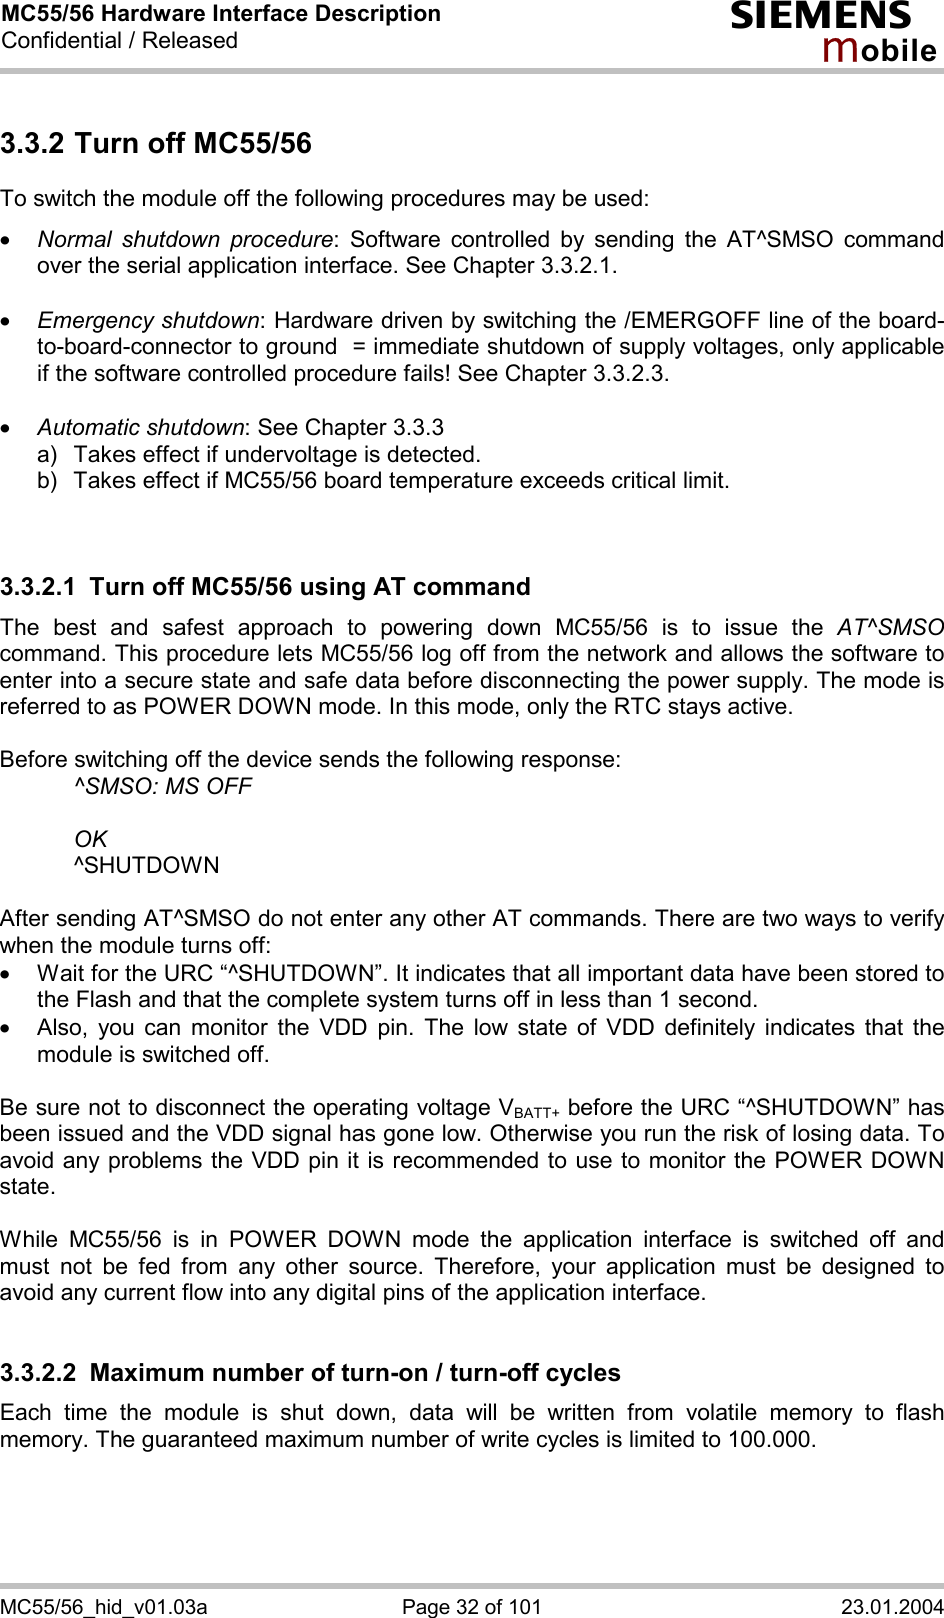 MC55/56 Hardware Interface Description Confidential / Released s mo b i l e MC55/56_hid_v01.03a  Page 32 of 101  23.01.2004 3.3.2 Turn off MC55/56 To switch the module off the following procedures may be used:  ·  Normal shutdown procedure: Software controlled by sending the AT^SMSO command over the serial application interface. See Chapter 3.3.2.1.  ·  Emergency shutdown: Hardware driven by switching the /EMERGOFF line of the board-to-board-connector to ground  = immediate shutdown of supply voltages, only applicable if the software controlled procedure fails! See Chapter 3.3.2.3.  ·  Automatic shutdown: See Chapter 3.3.3 a)   Takes effect if undervoltage is detected.  b)   Takes effect if MC55/56 board temperature exceeds critical limit.   3.3.2.1  Turn off MC55/56 using AT command The best and safest approach to powering down MC55/56 is to issue the AT^SMSO command. This procedure lets MC55/56 log off from the network and allows the software to enter into a secure state and safe data before disconnecting the power supply. The mode is referred to as POWER DOWN mode. In this mode, only the RTC stays active.  Before switching off the device sends the following response:      ^SMSO: MS OFF    OK   ^SHUTDOWN  After sending AT^SMSO do not enter any other AT commands. There are two ways to verify when the module turns off:  ·  Wait for the URC “^SHUTDOWN”. It indicates that all important data have been stored to the Flash and that the complete system turns off in less than 1 second. ·  Also, you can monitor the VDD pin. The low state of VDD definitely indicates that the module is switched off.  Be sure not to disconnect the operating voltage VBATT+ before the URC “^SHUTDOWN” has been issued and the VDD signal has gone low. Otherwise you run the risk of losing data. To avoid any problems the VDD pin it is recommended to use to monitor the POWER DOWN state.  While MC55/56 is in POWER DOWN mode the application interface is switched off and must not be fed from any other source. Therefore, your application must be designed to avoid any current flow into any digital pins of the application interface.   3.3.2.2  Maximum number of turn-on / turn-off cycles Each time the module is shut down, data will be written from volatile memory to flash memory. The guaranteed maximum number of write cycles is limited to 100.000.   